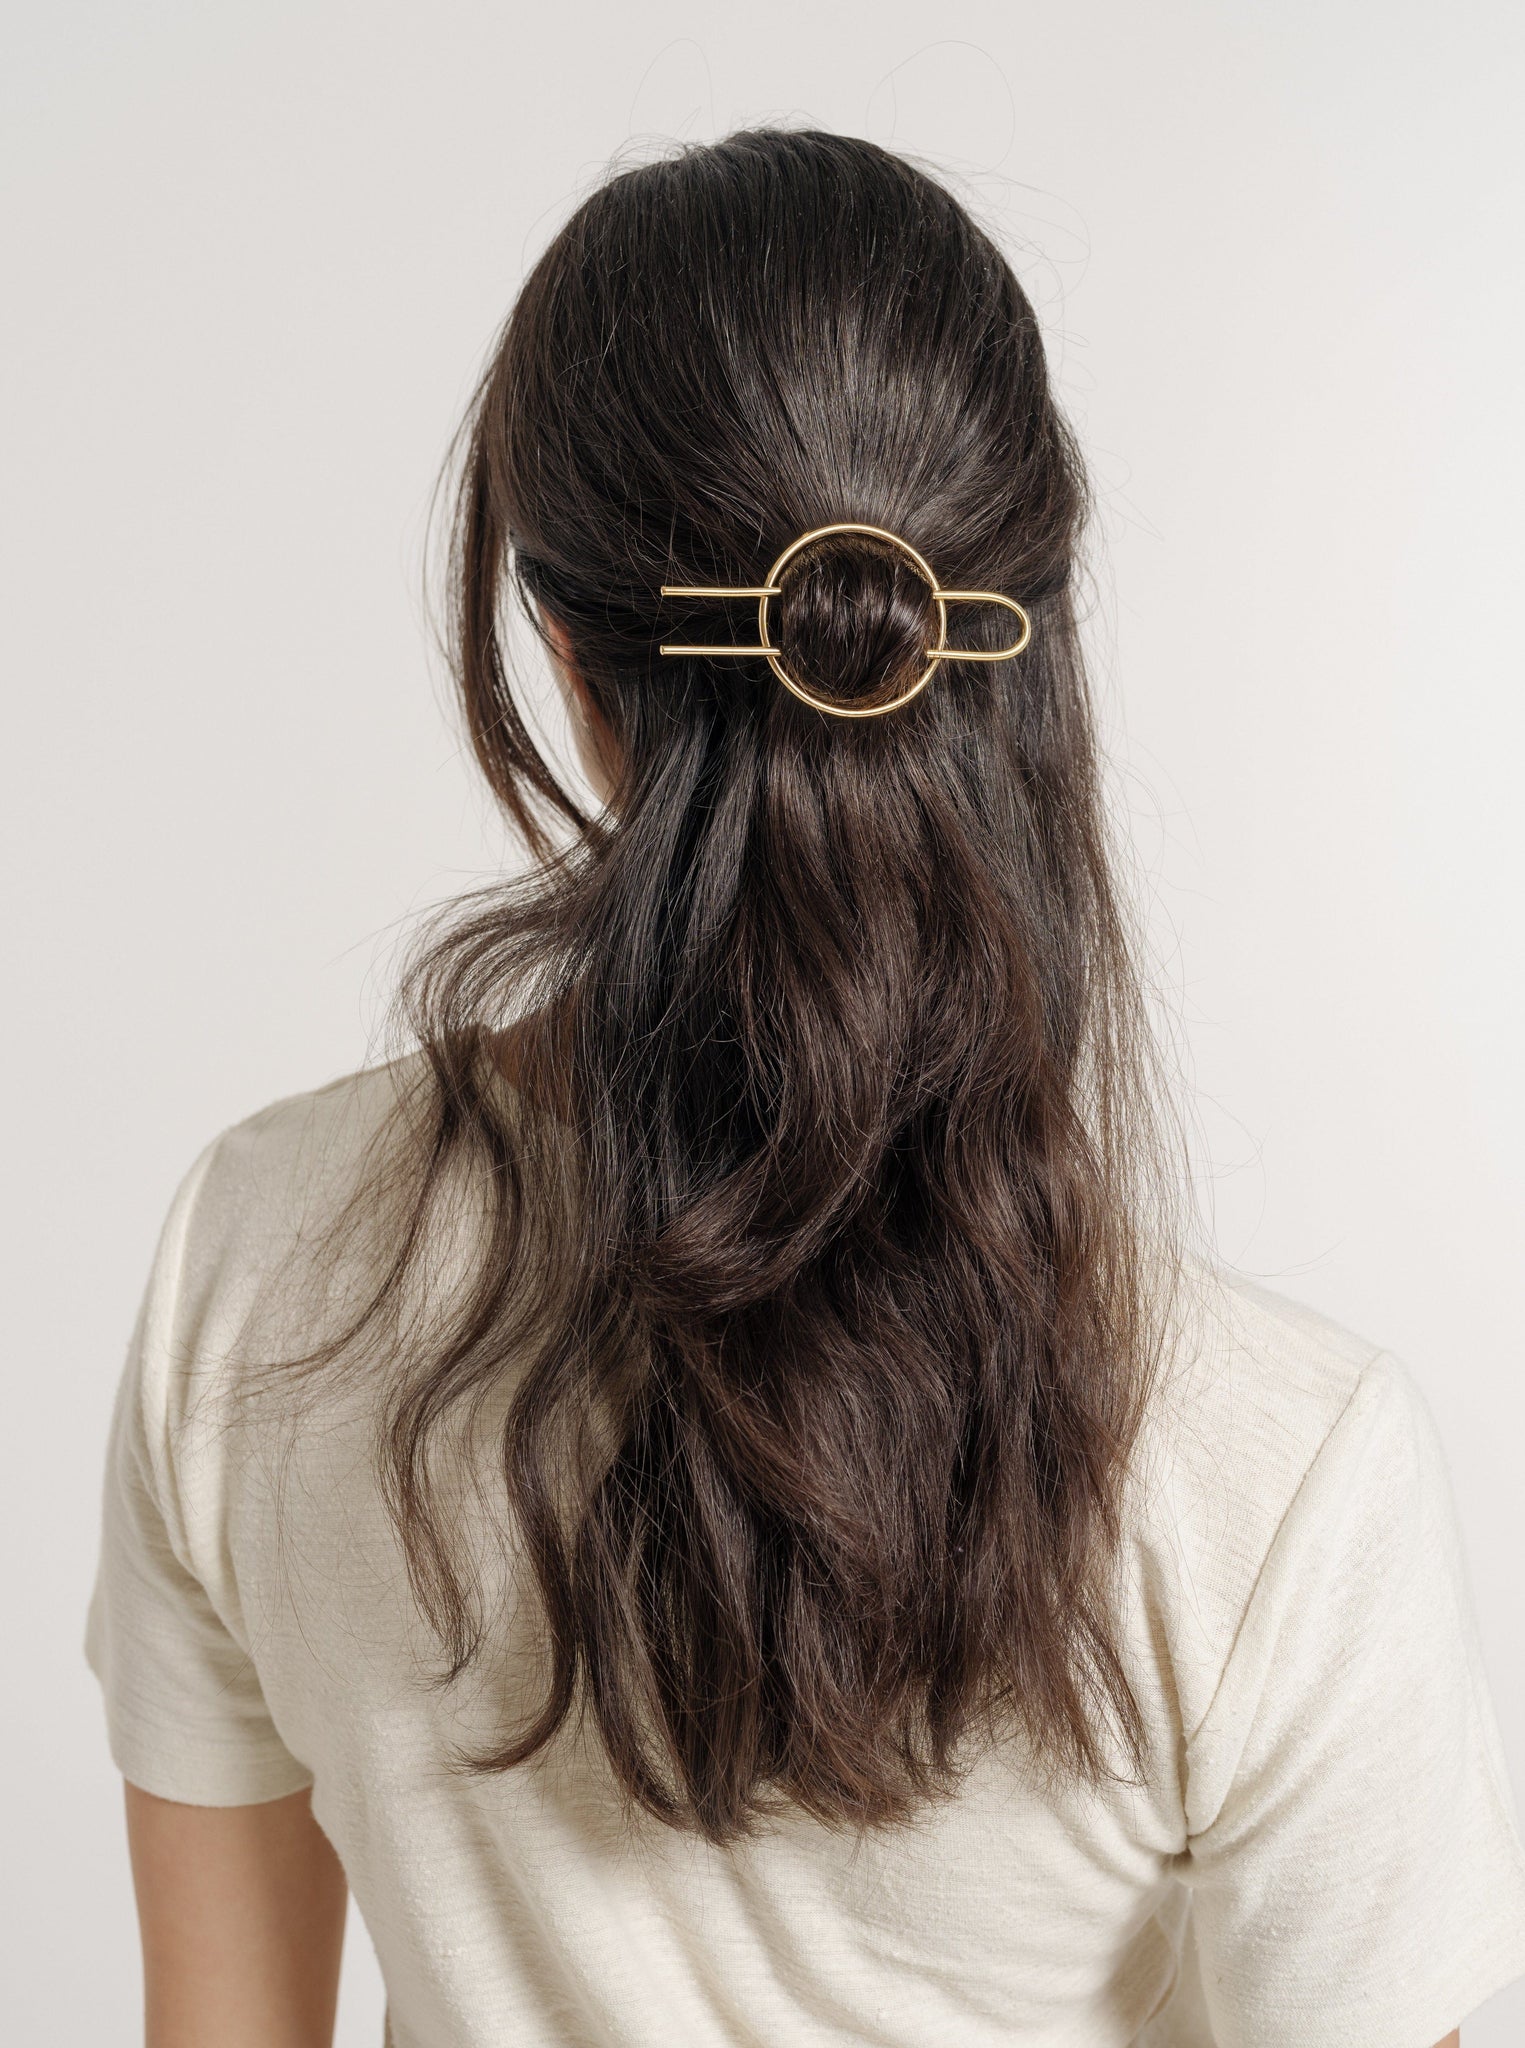 The back view of a woman wearing a Classic Hair Pin.